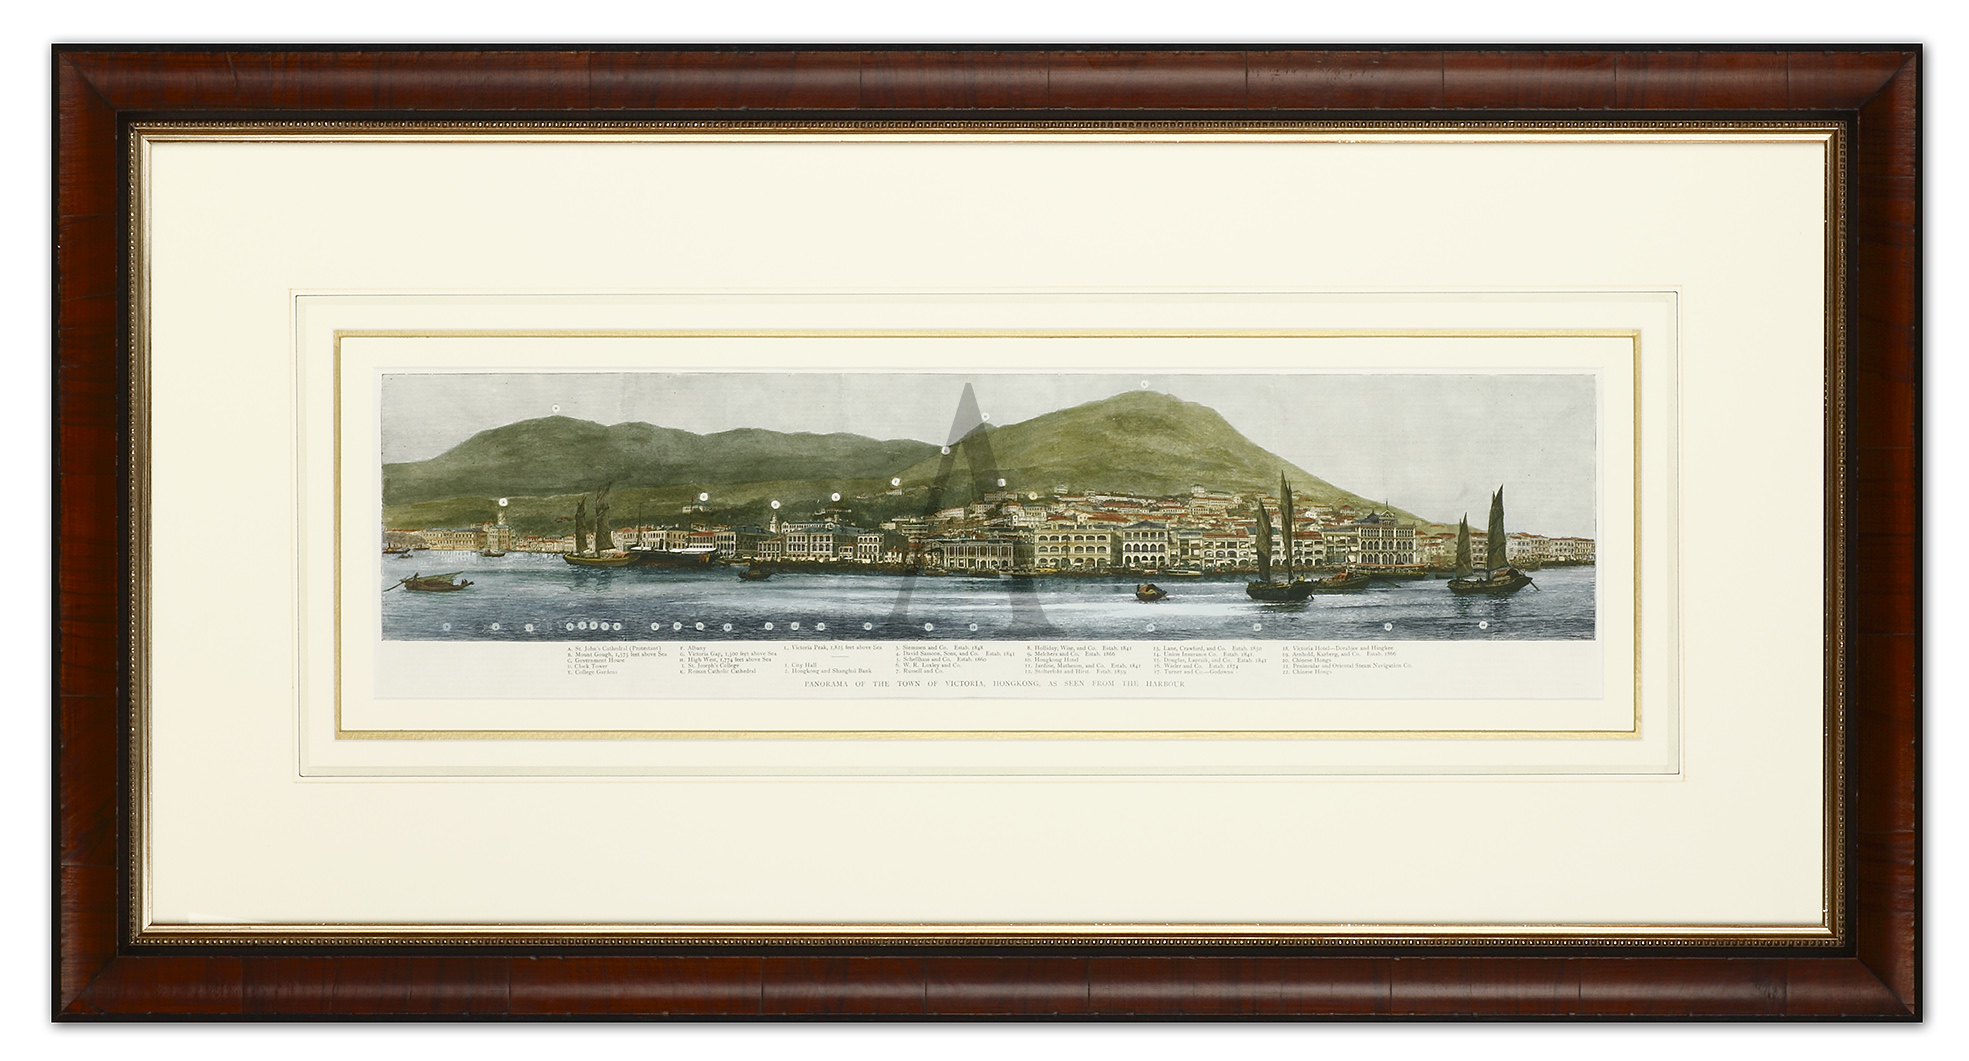 Panorama of the Town of Victoria, Hong Kong, as Seen from the Harbour. - Antique Print from 1887